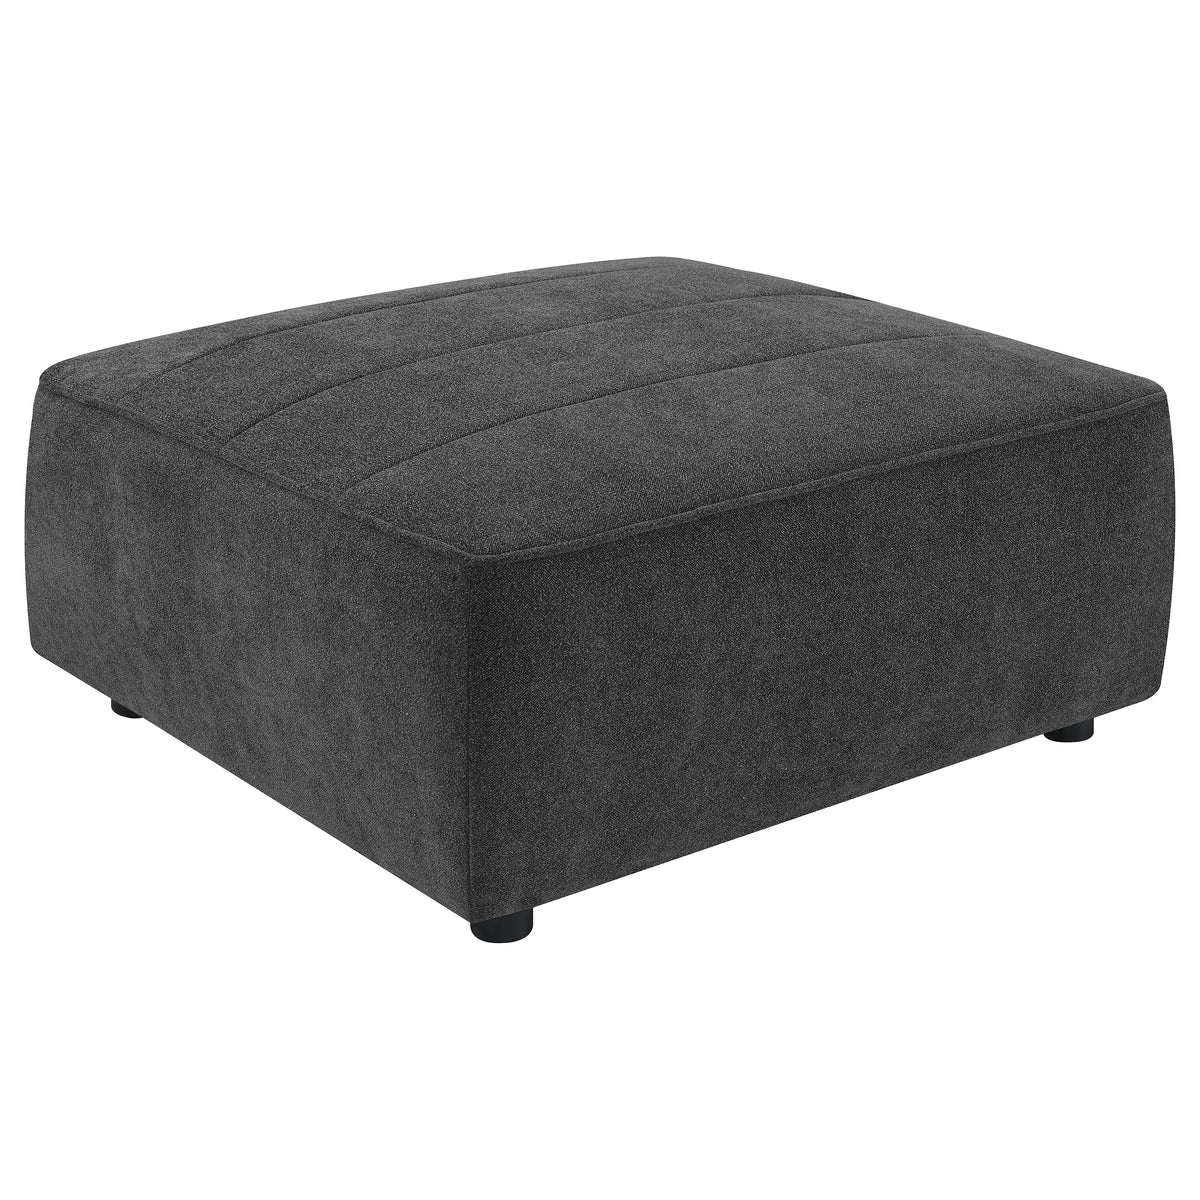 Sunny Upholstered Square Ottoman Dark Charcoal Sunny Upholstered Square Ottoman Dark Charcoal Half Price Furniture